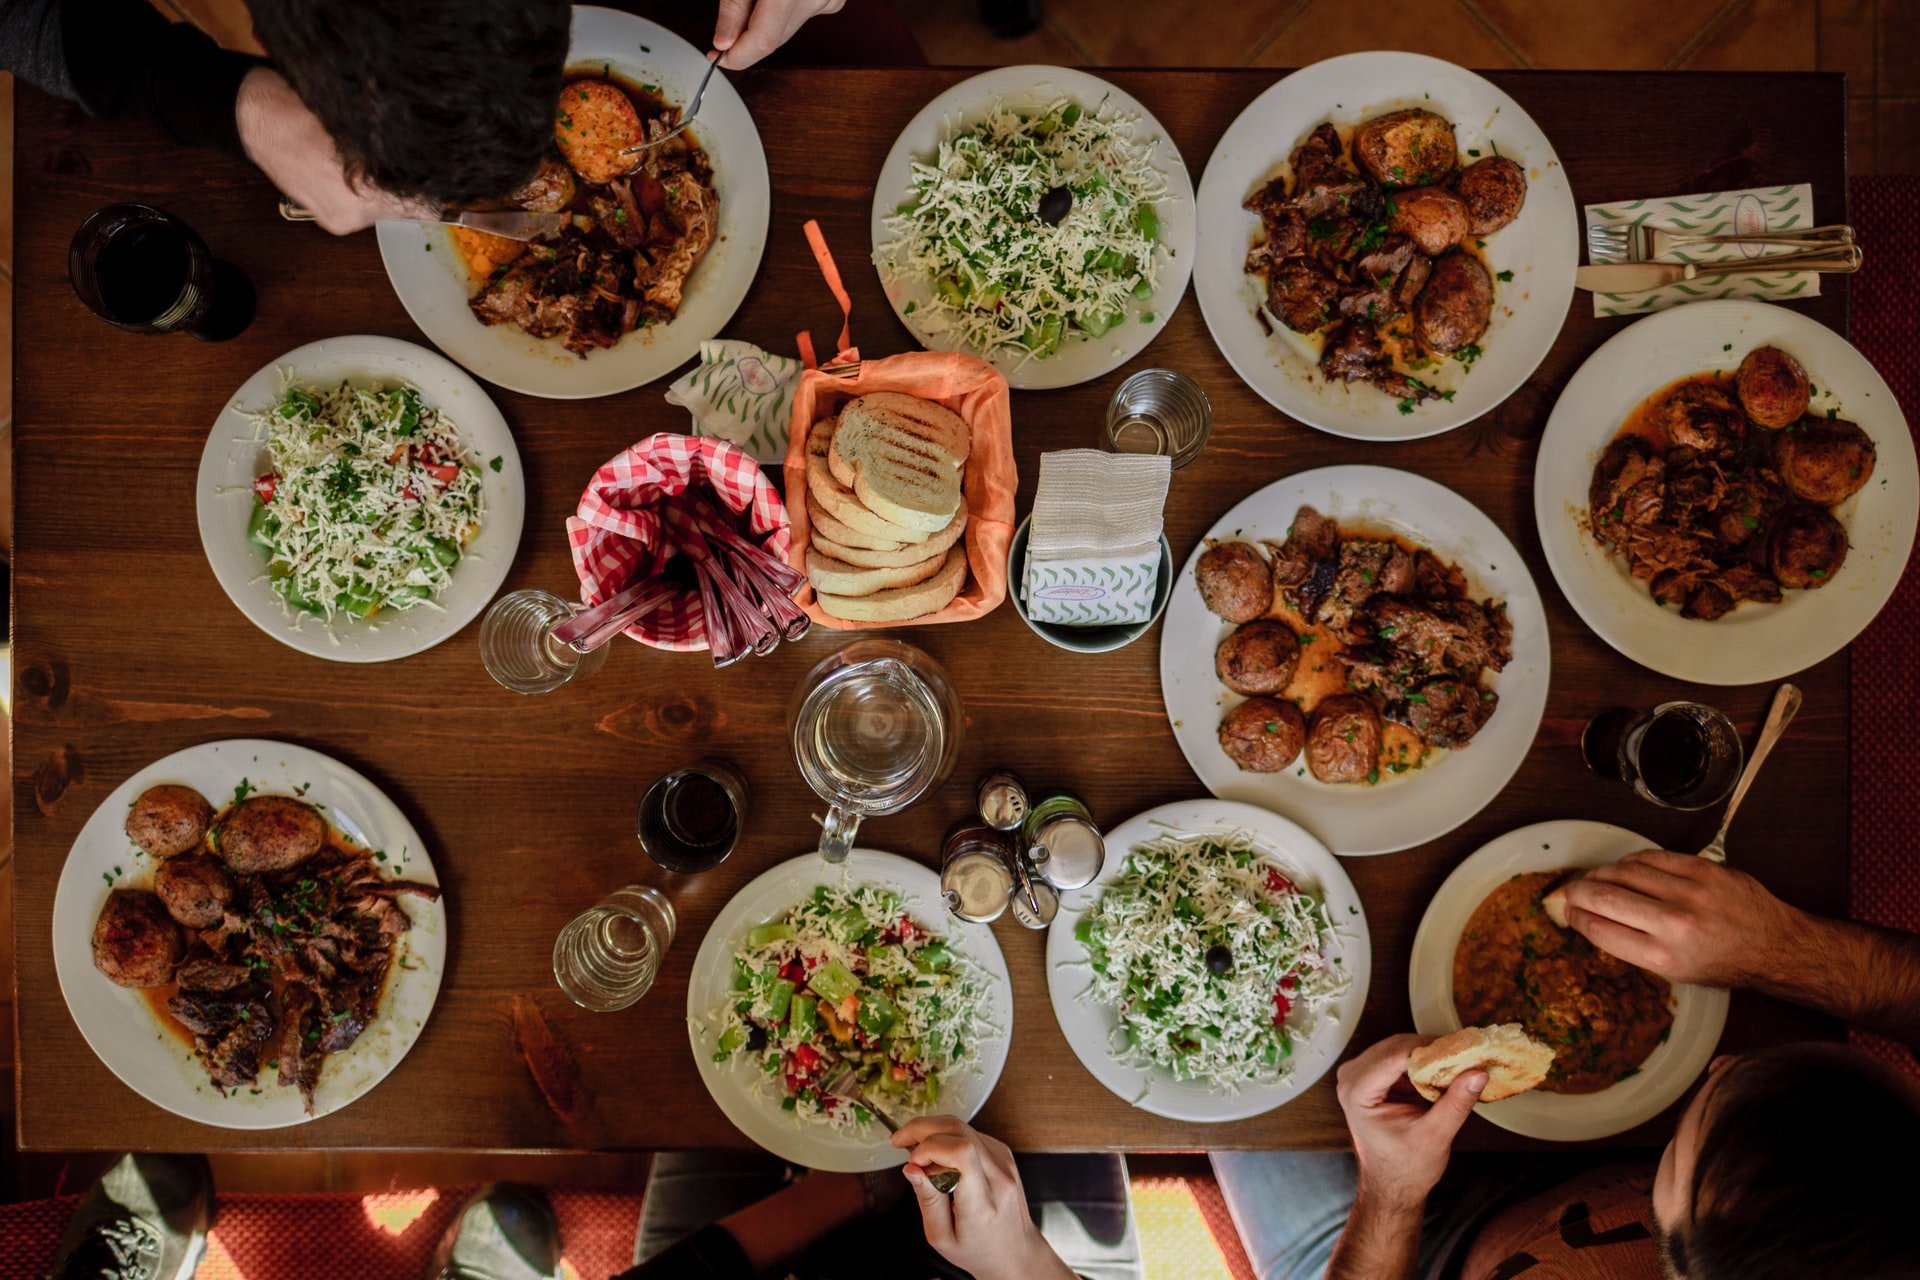 The family gathered for dinner | Source: Unsplash